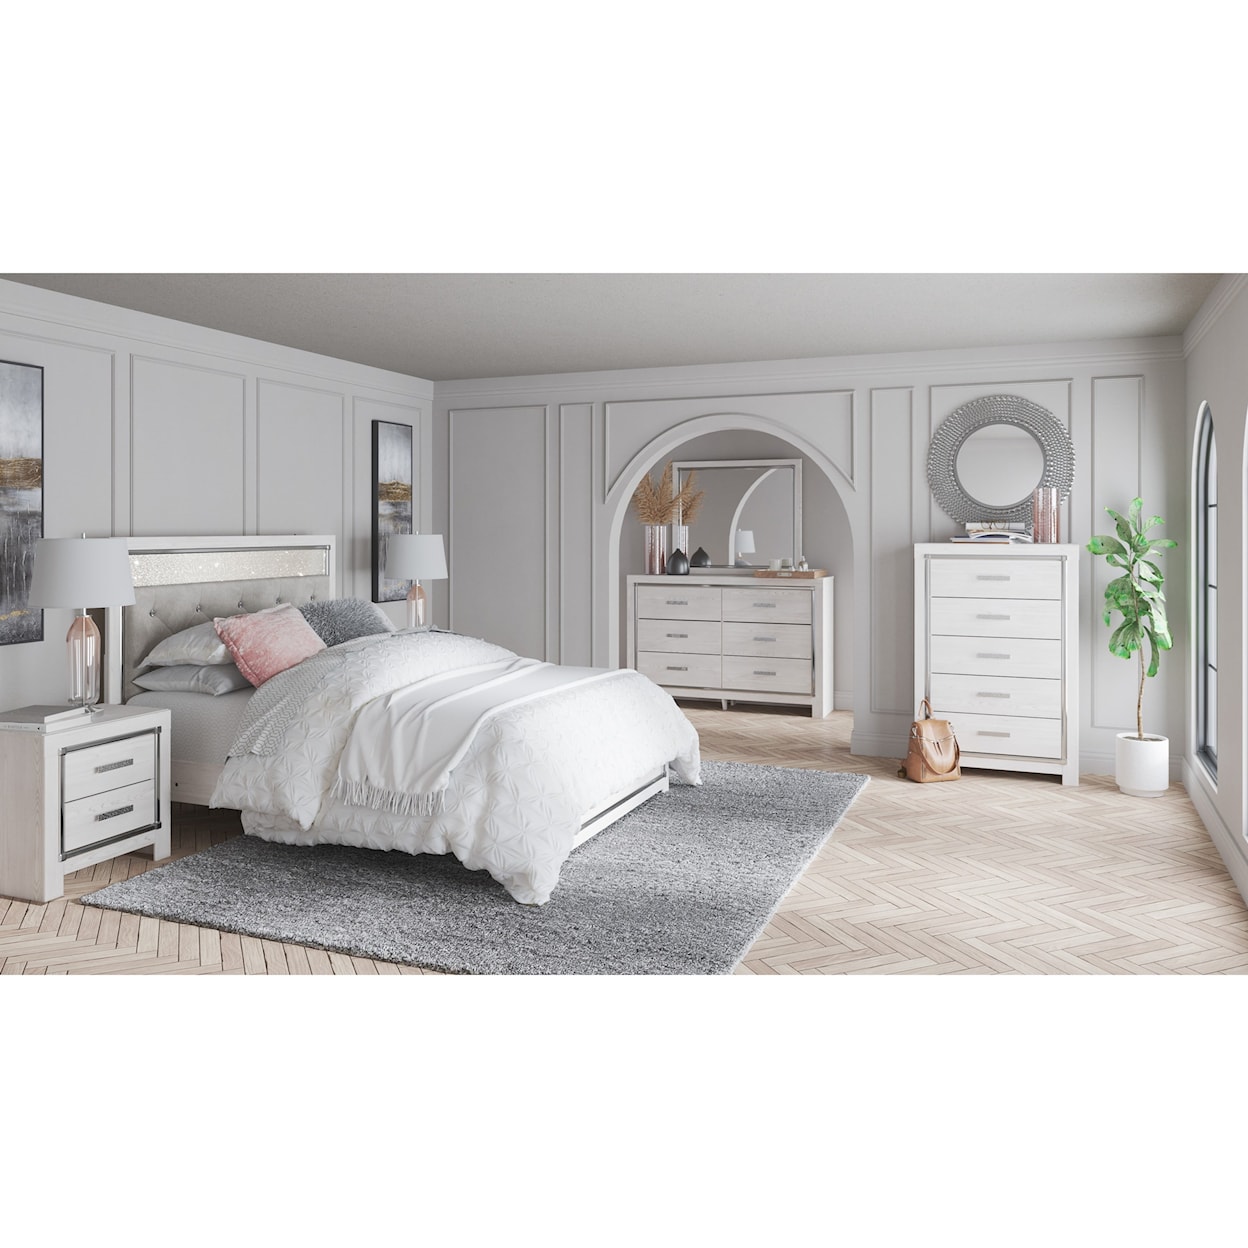 Signature Design by Ashley Furniture Altyra Twin Bedroom Group